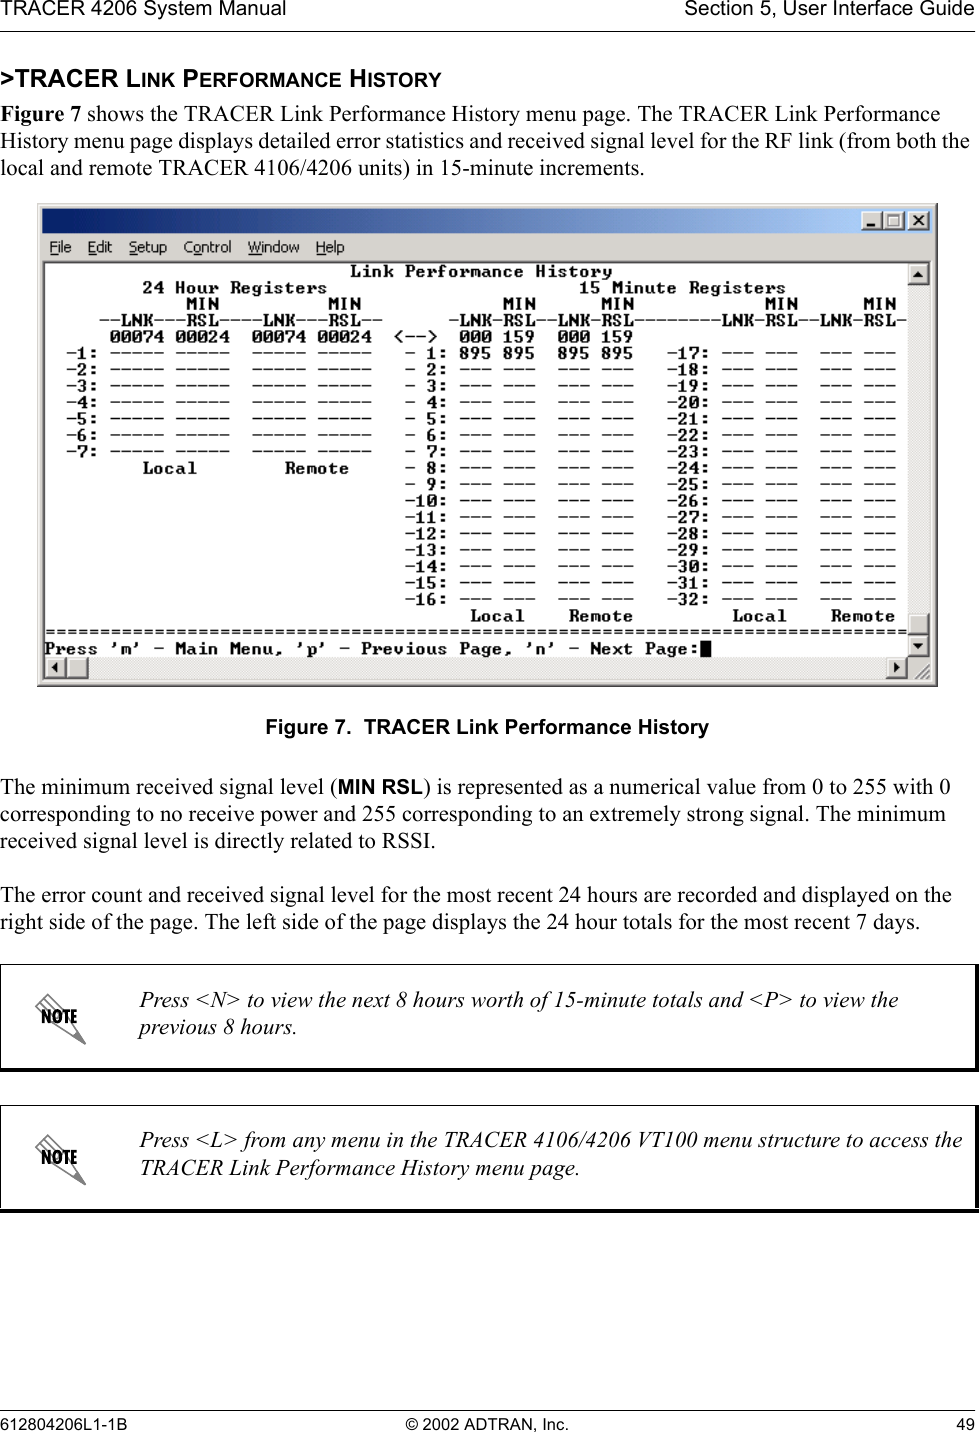 TRACER 4206 System Manual Section 5, User Interface Guide612804206L1-1B © 2002 ADTRAN, Inc. 49&gt;TRACER LINK PERFORMANCE HISTORYFigure 7 shows the TRACER Link Performance History menu page. The TRACER Link Performance History menu page displays detailed error statistics and received signal level for the RF link (from both the local and remote TRACER 4106/4206 units) in 15-minute increments. Figure 7.  TRACER Link Performance HistoryThe minimum received signal level (MIN RSL) is represented as a numerical value from 0 to 255 with 0 corresponding to no receive power and 255 corresponding to an extremely strong signal. The minimum received signal level is directly related to RSSI.The error count and received signal level for the most recent 24 hours are recorded and displayed on the right side of the page. The left side of the page displays the 24 hour totals for the most recent 7 days. Press &lt;N&gt; to view the next 8 hours worth of 15-minute totals and &lt;P&gt; to view the previous 8 hours.Press &lt;L&gt; from any menu in the TRACER 4106/4206 VT100 menu structure to access the TRACER Link Performance History menu page.